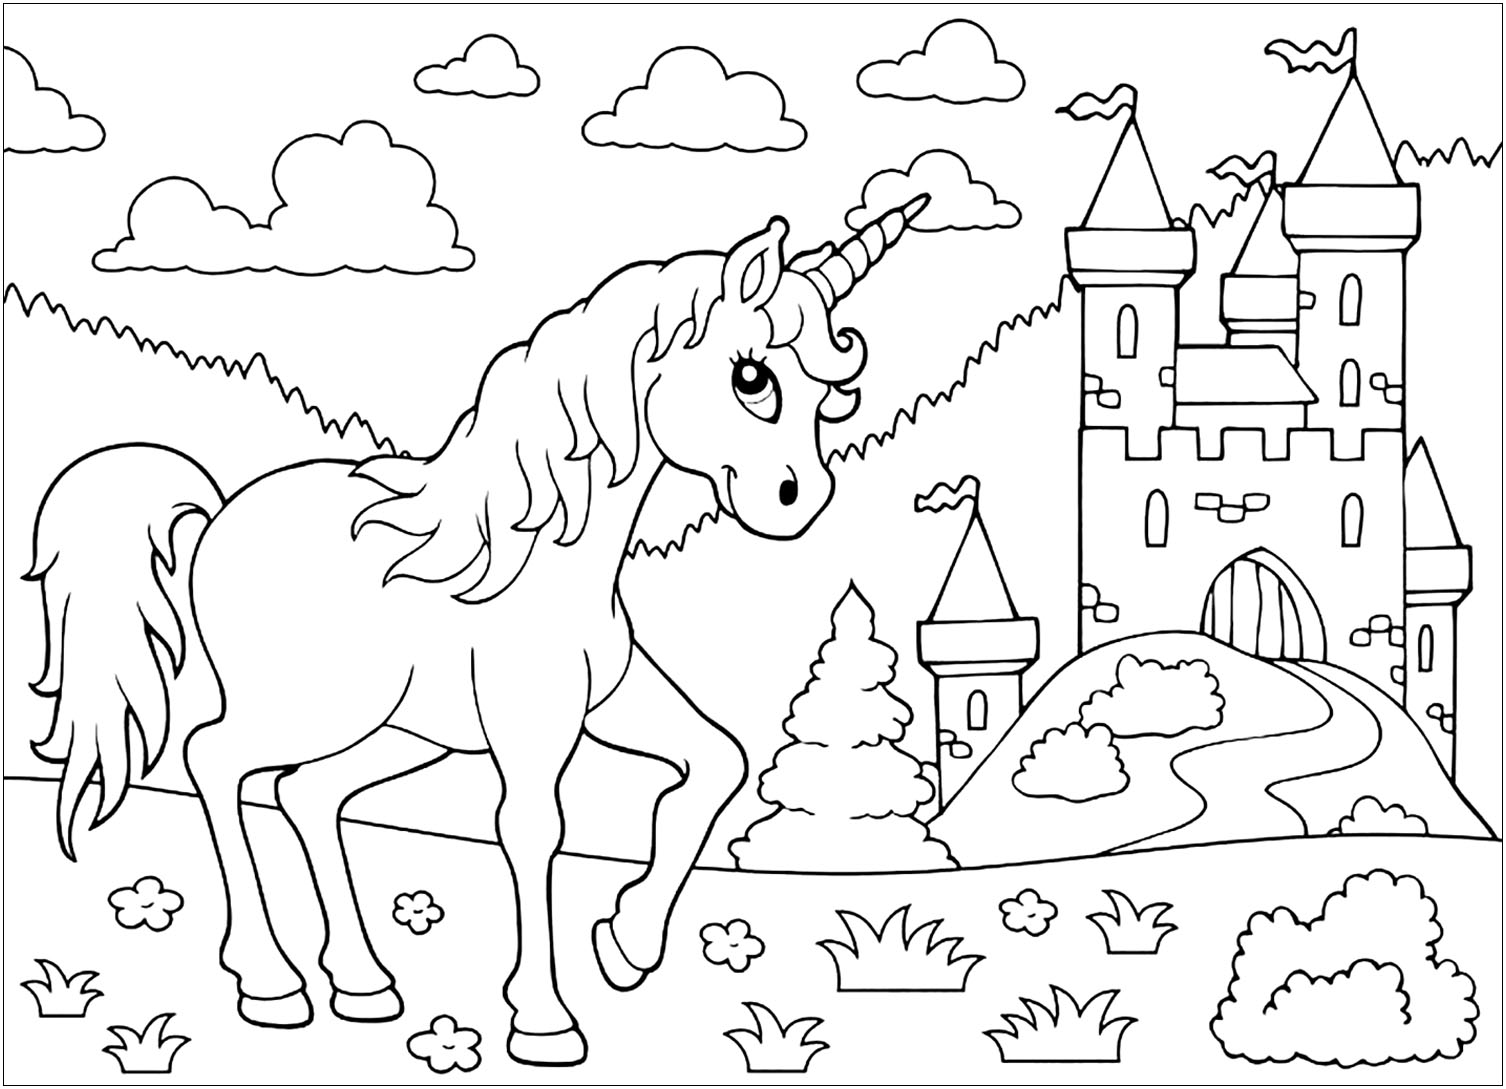 Download Unicorns Free To Color For Kids Unicorns Kids Coloring Pages